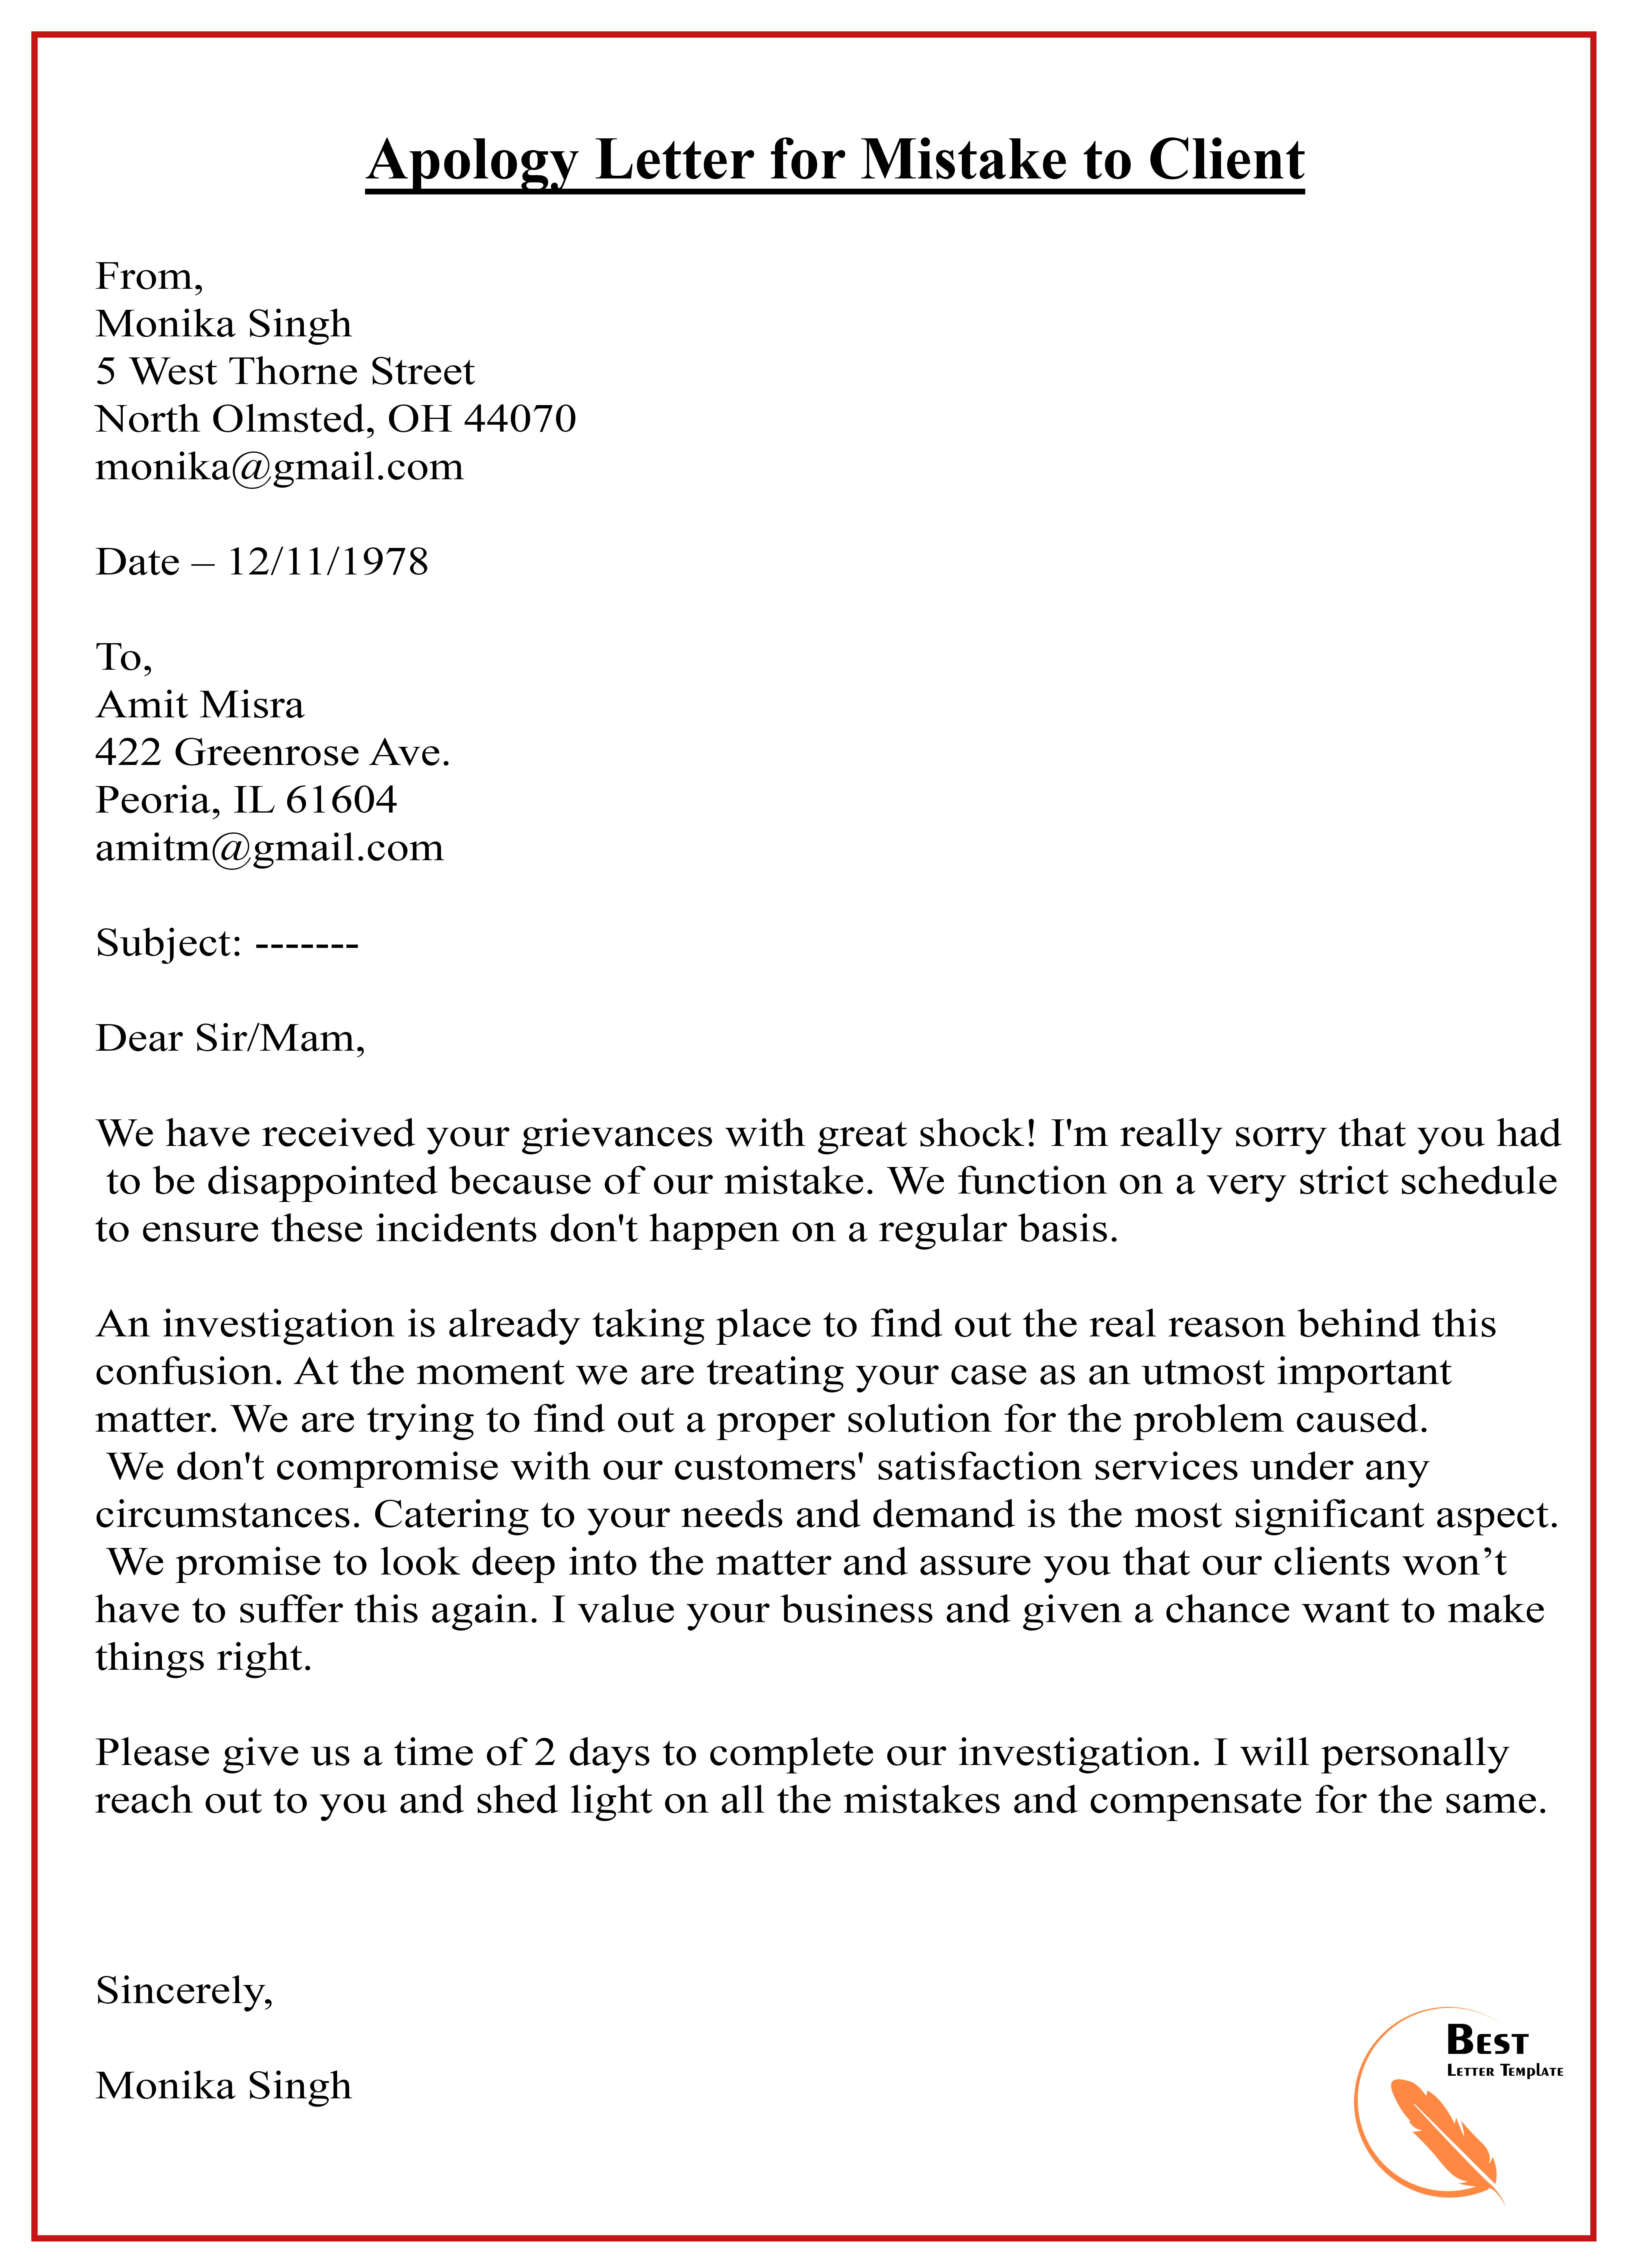 Apology letter for MISTAKE Best Letter Template